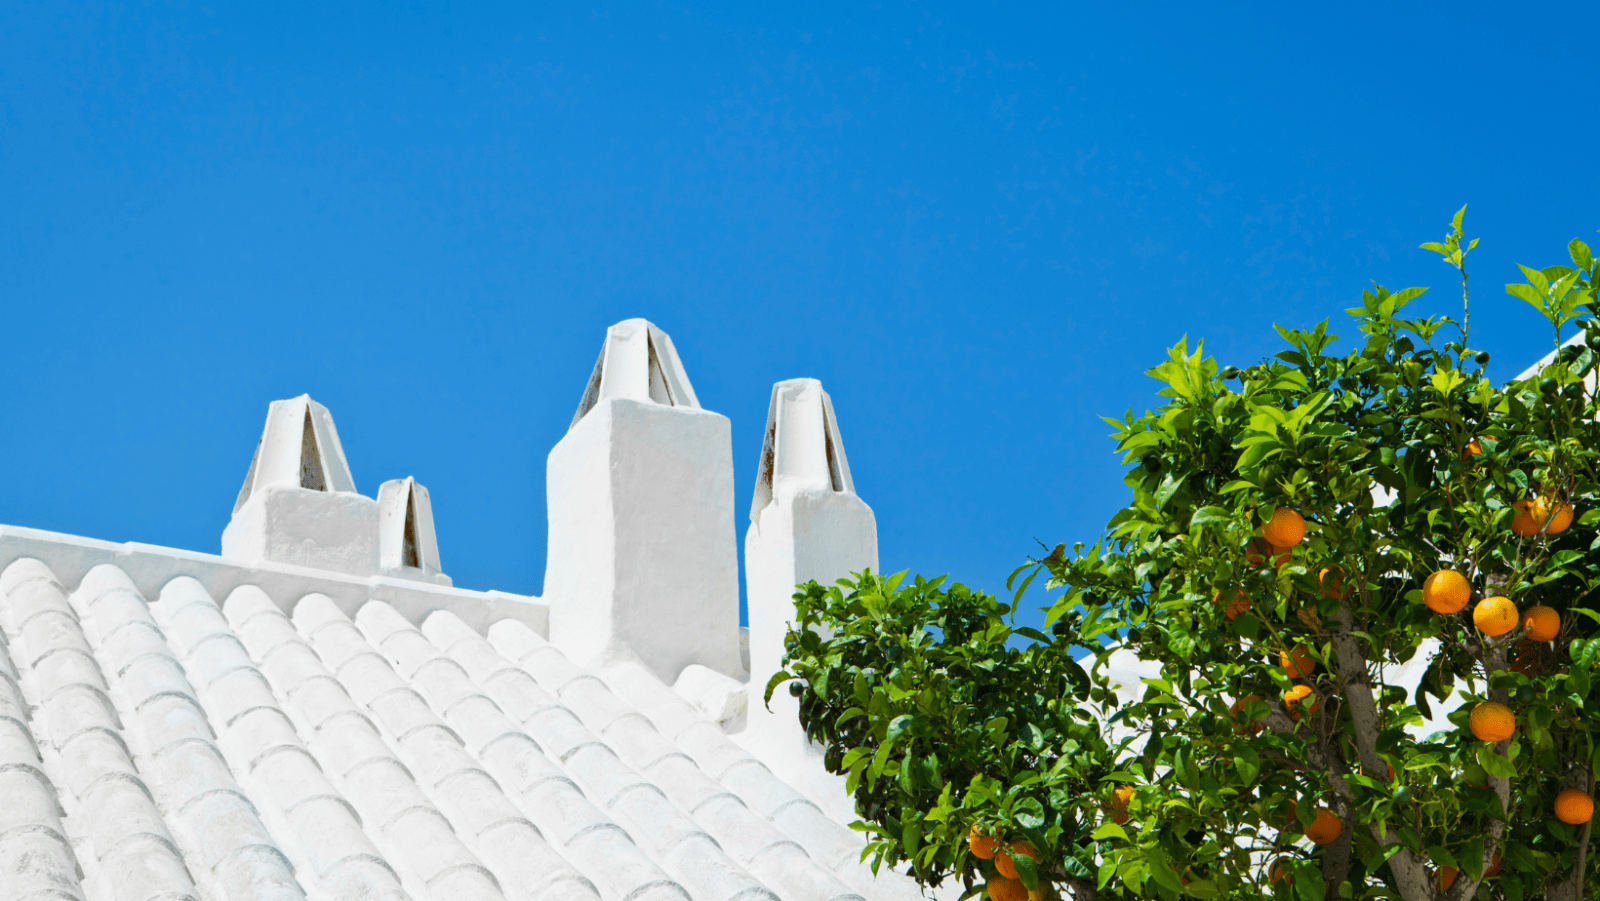 Painting your roof white